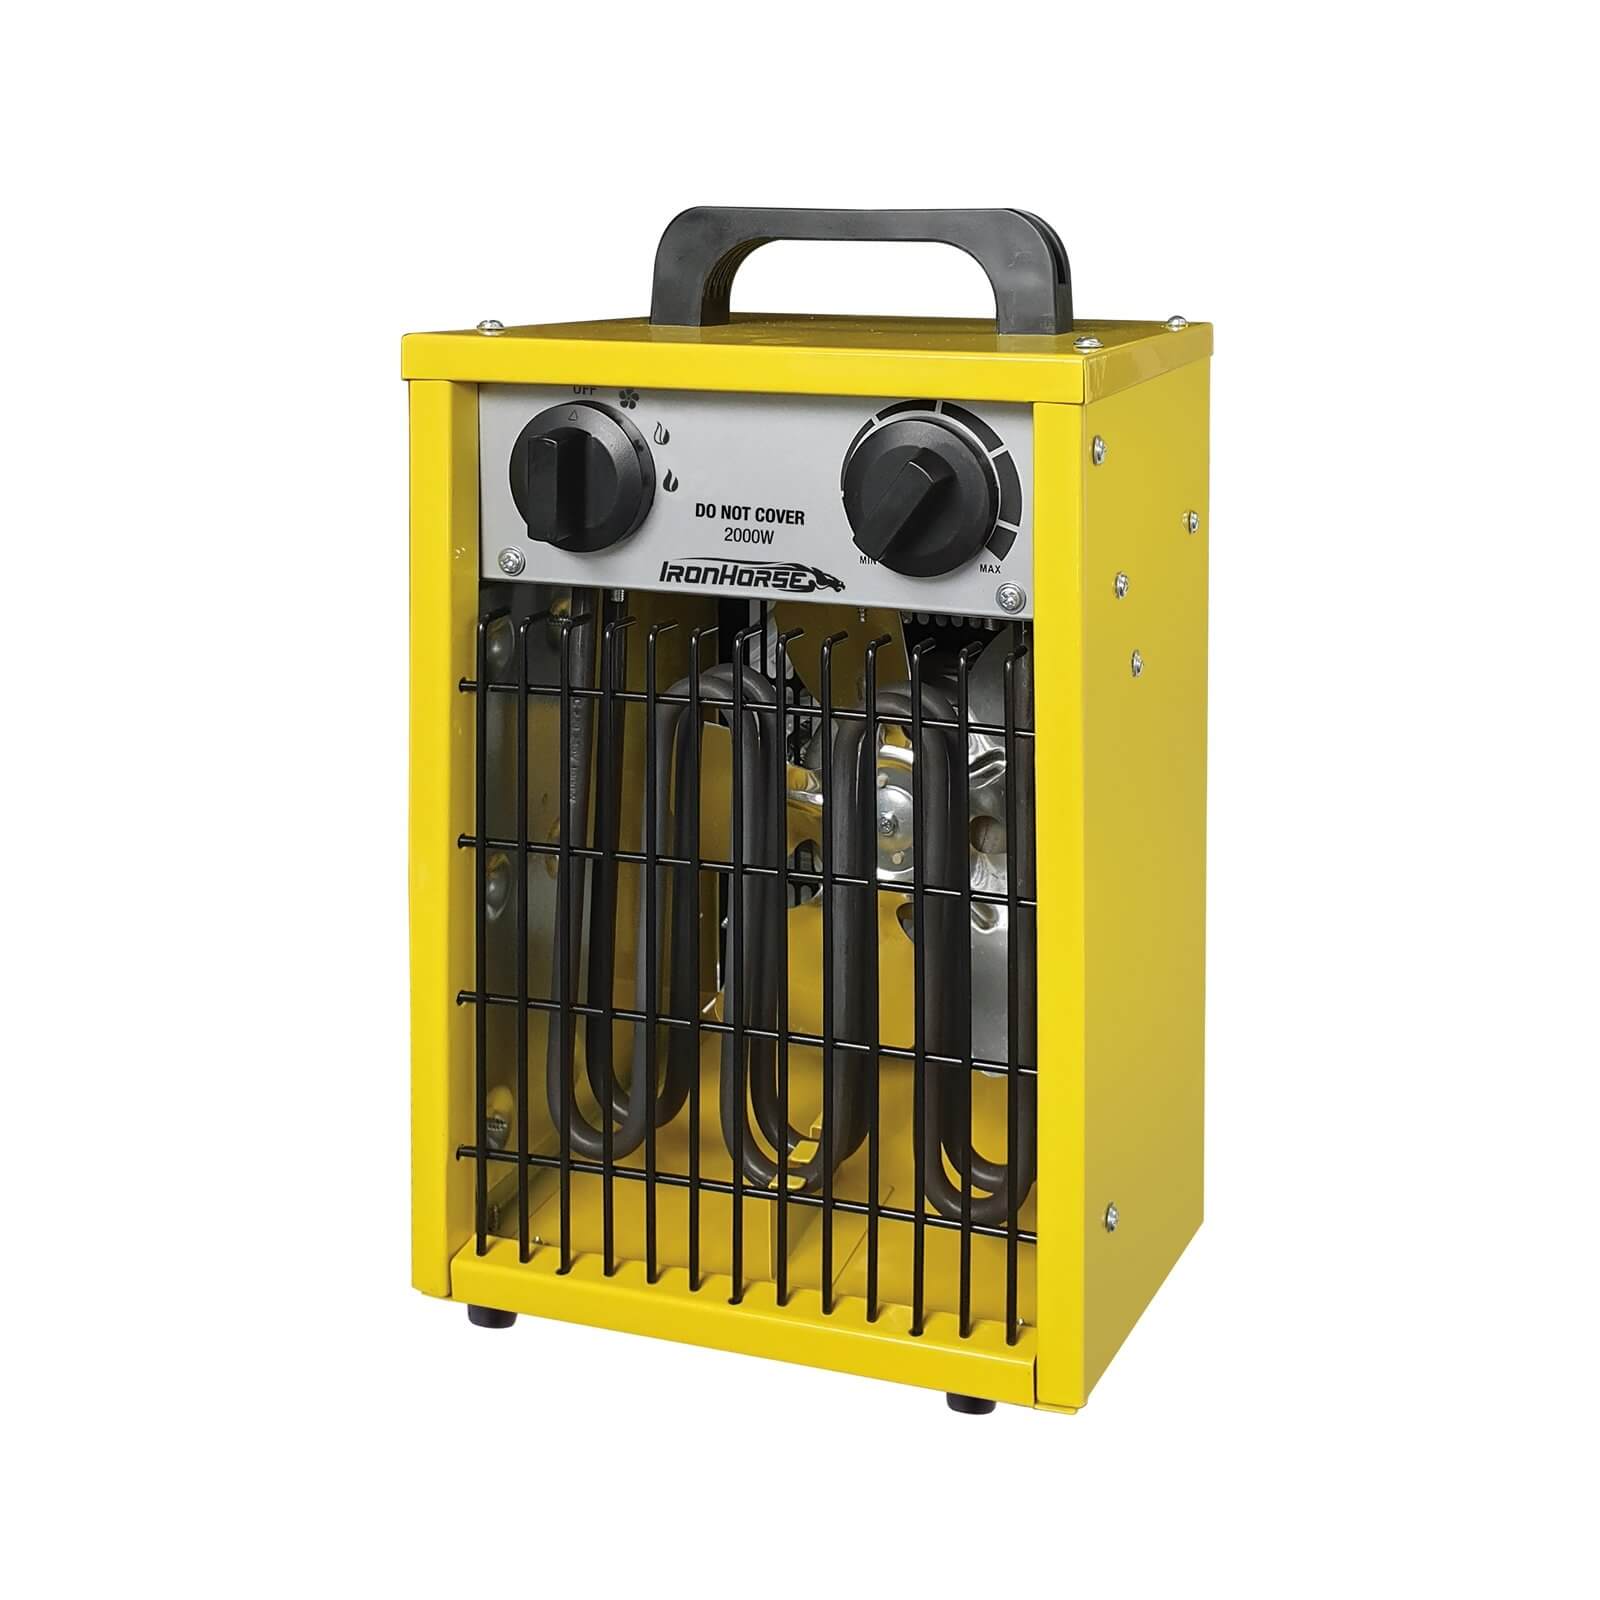 2000W Industrial Fan Heater With Adjustable Themostat